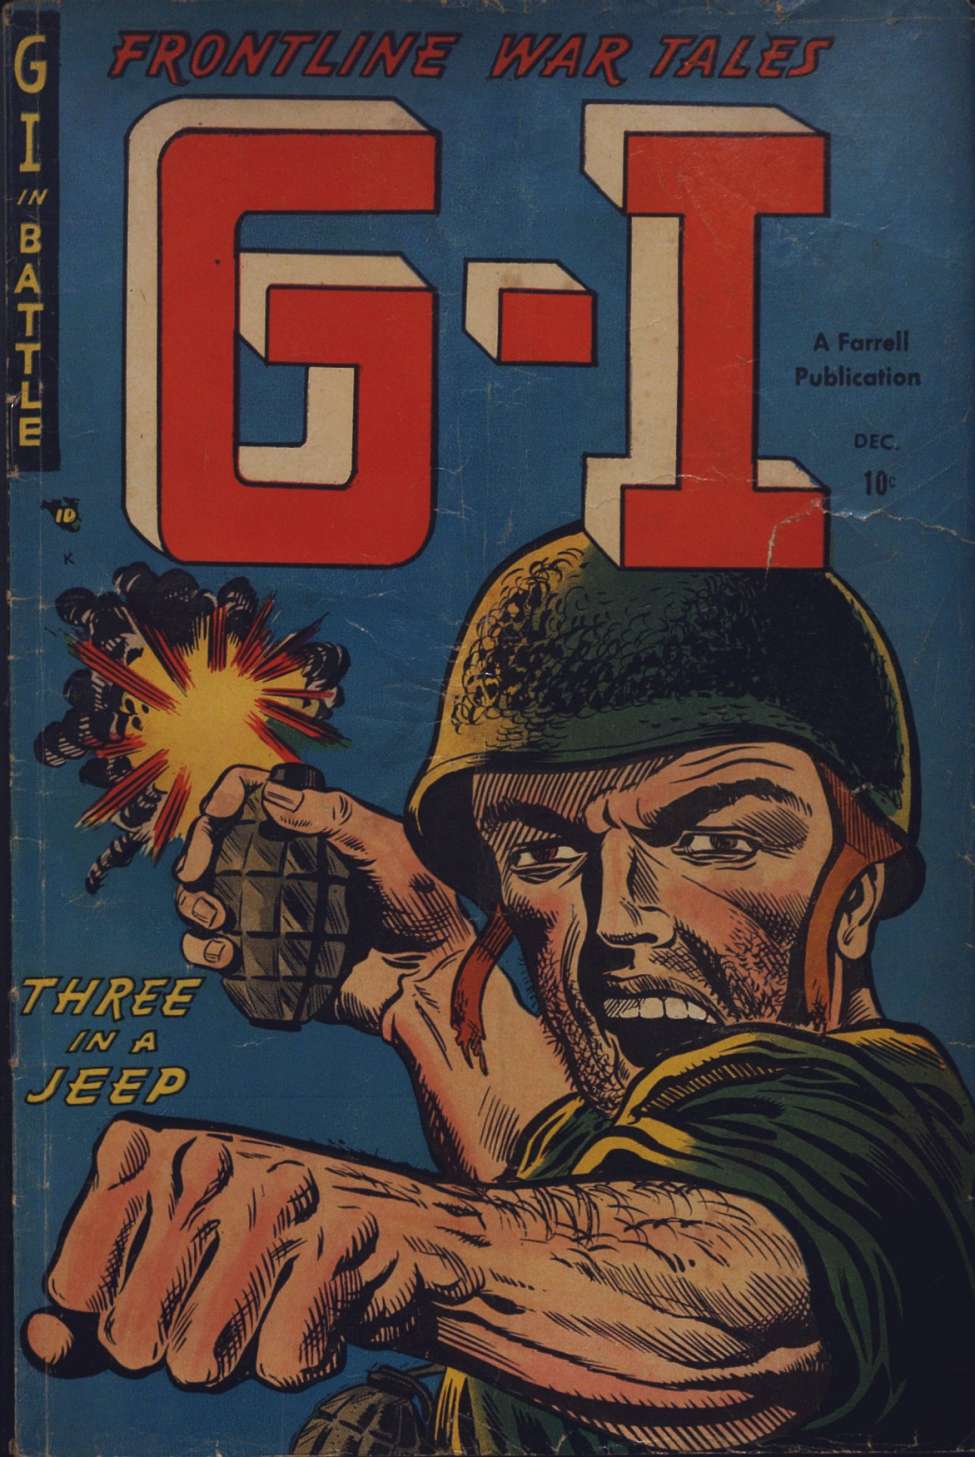 Book Cover For G-I in Battle 3